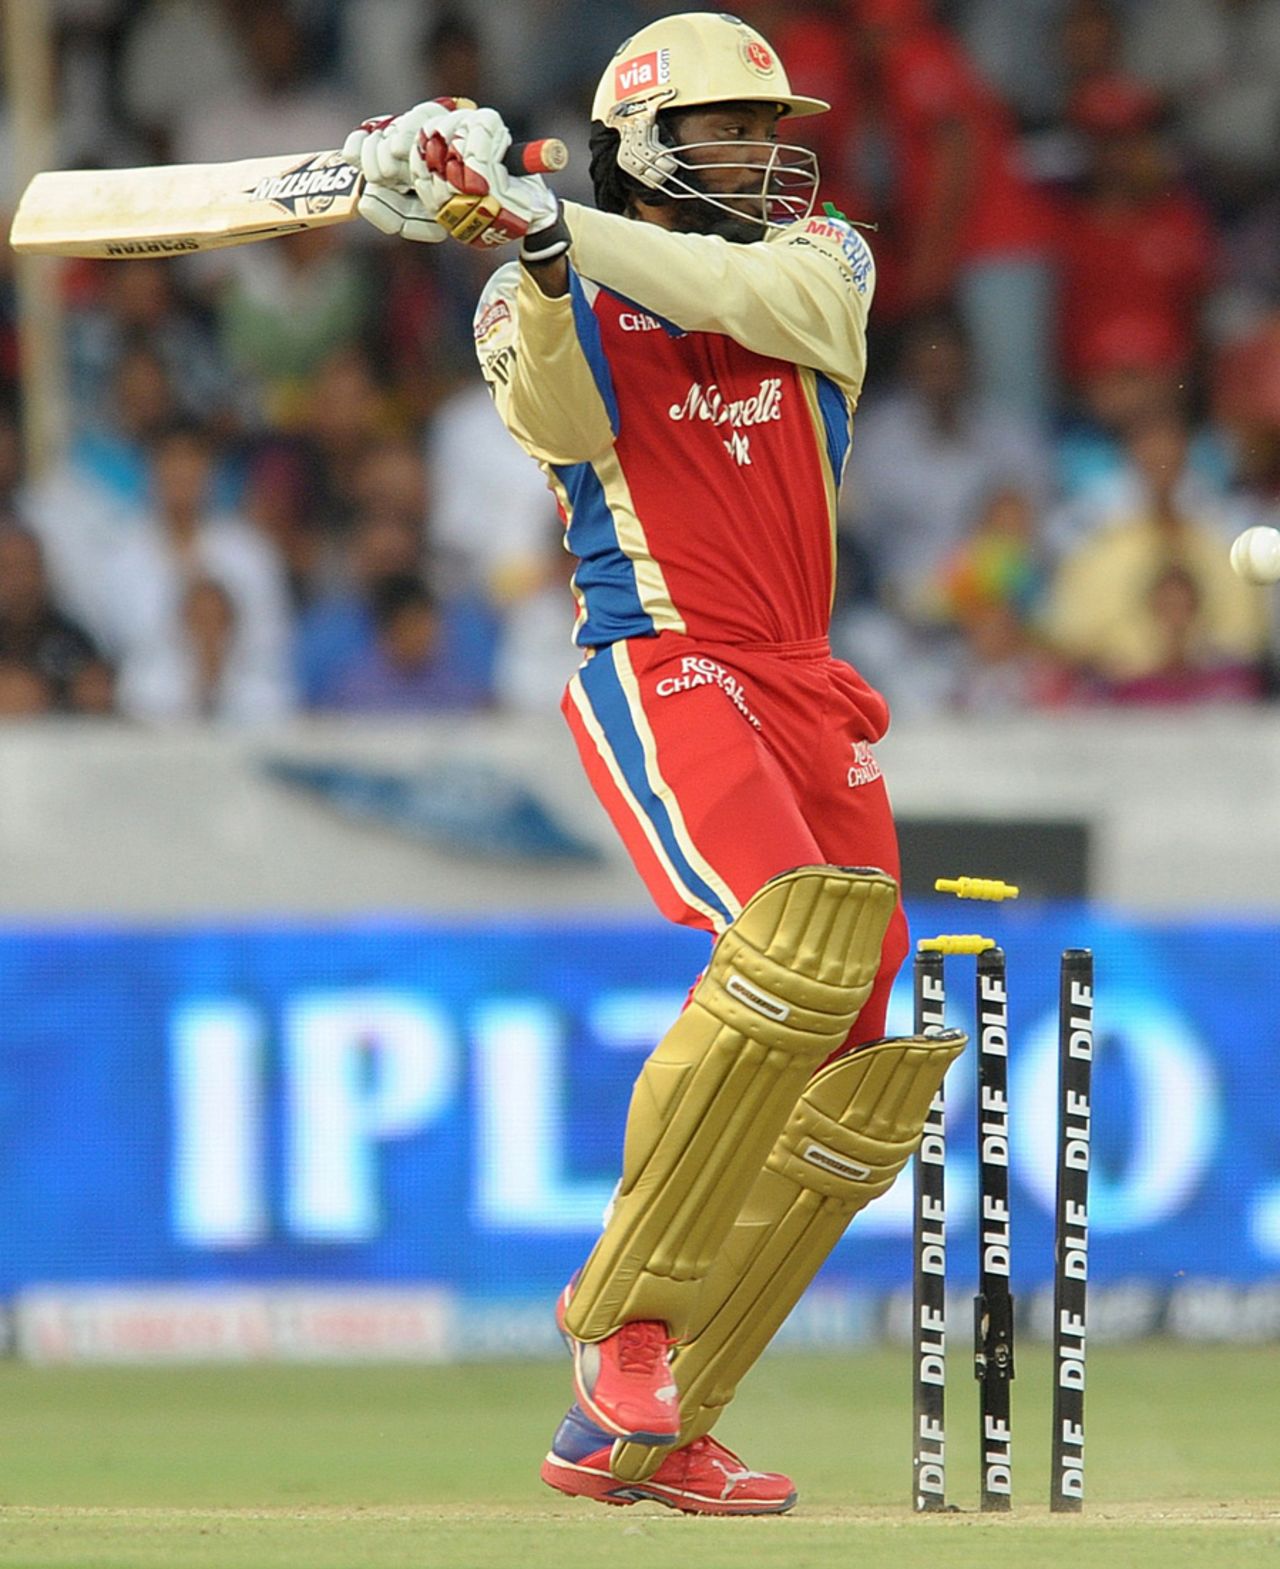 Chris Gayle is bowled by Dale Steyn, Deccan Chargers v Royal Challengers Bangalore, IPL, Hyderabad, May 20, 2012